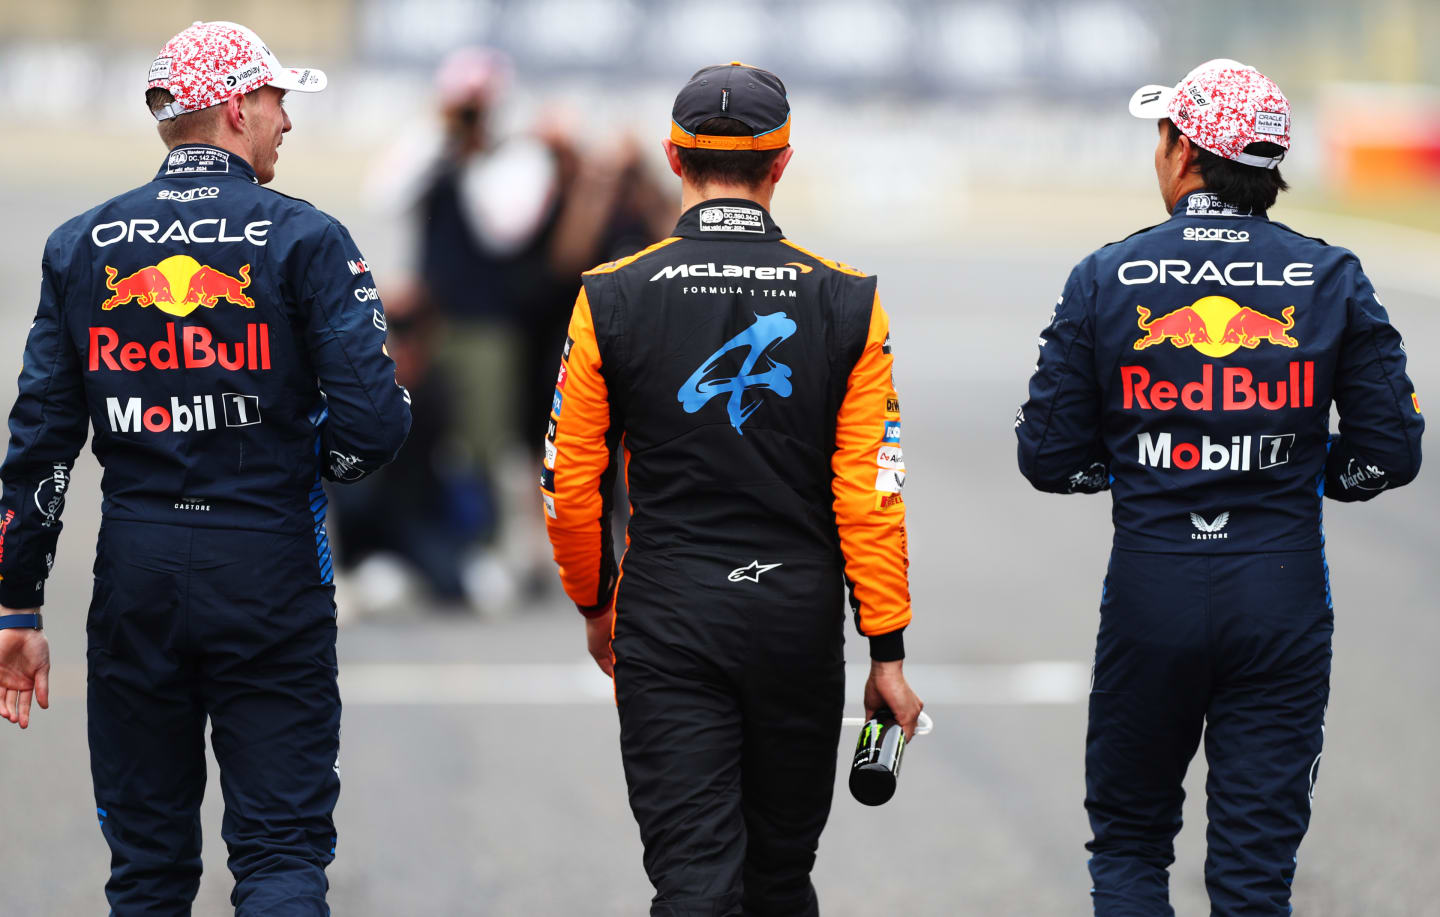 SUZUKA, JAPAN - APRIL 06: Race winner qualifier Max Verstappen of the Netherlands and Oracle Red Bull Racing (L), Second placed qualifier Sergio Perez of Mexico and Oracle Red Bull Racing (R) and Third placed qualifier Lando Norris of Great Britain and McLaren (C) walk in parc ferme during qualifying ahead of the F1 Grand Prix of Japan at Suzuka International Racing Course on April 06, 2024 in Suzuka, Japan. (Photo by Peter Fox/Getty Images)